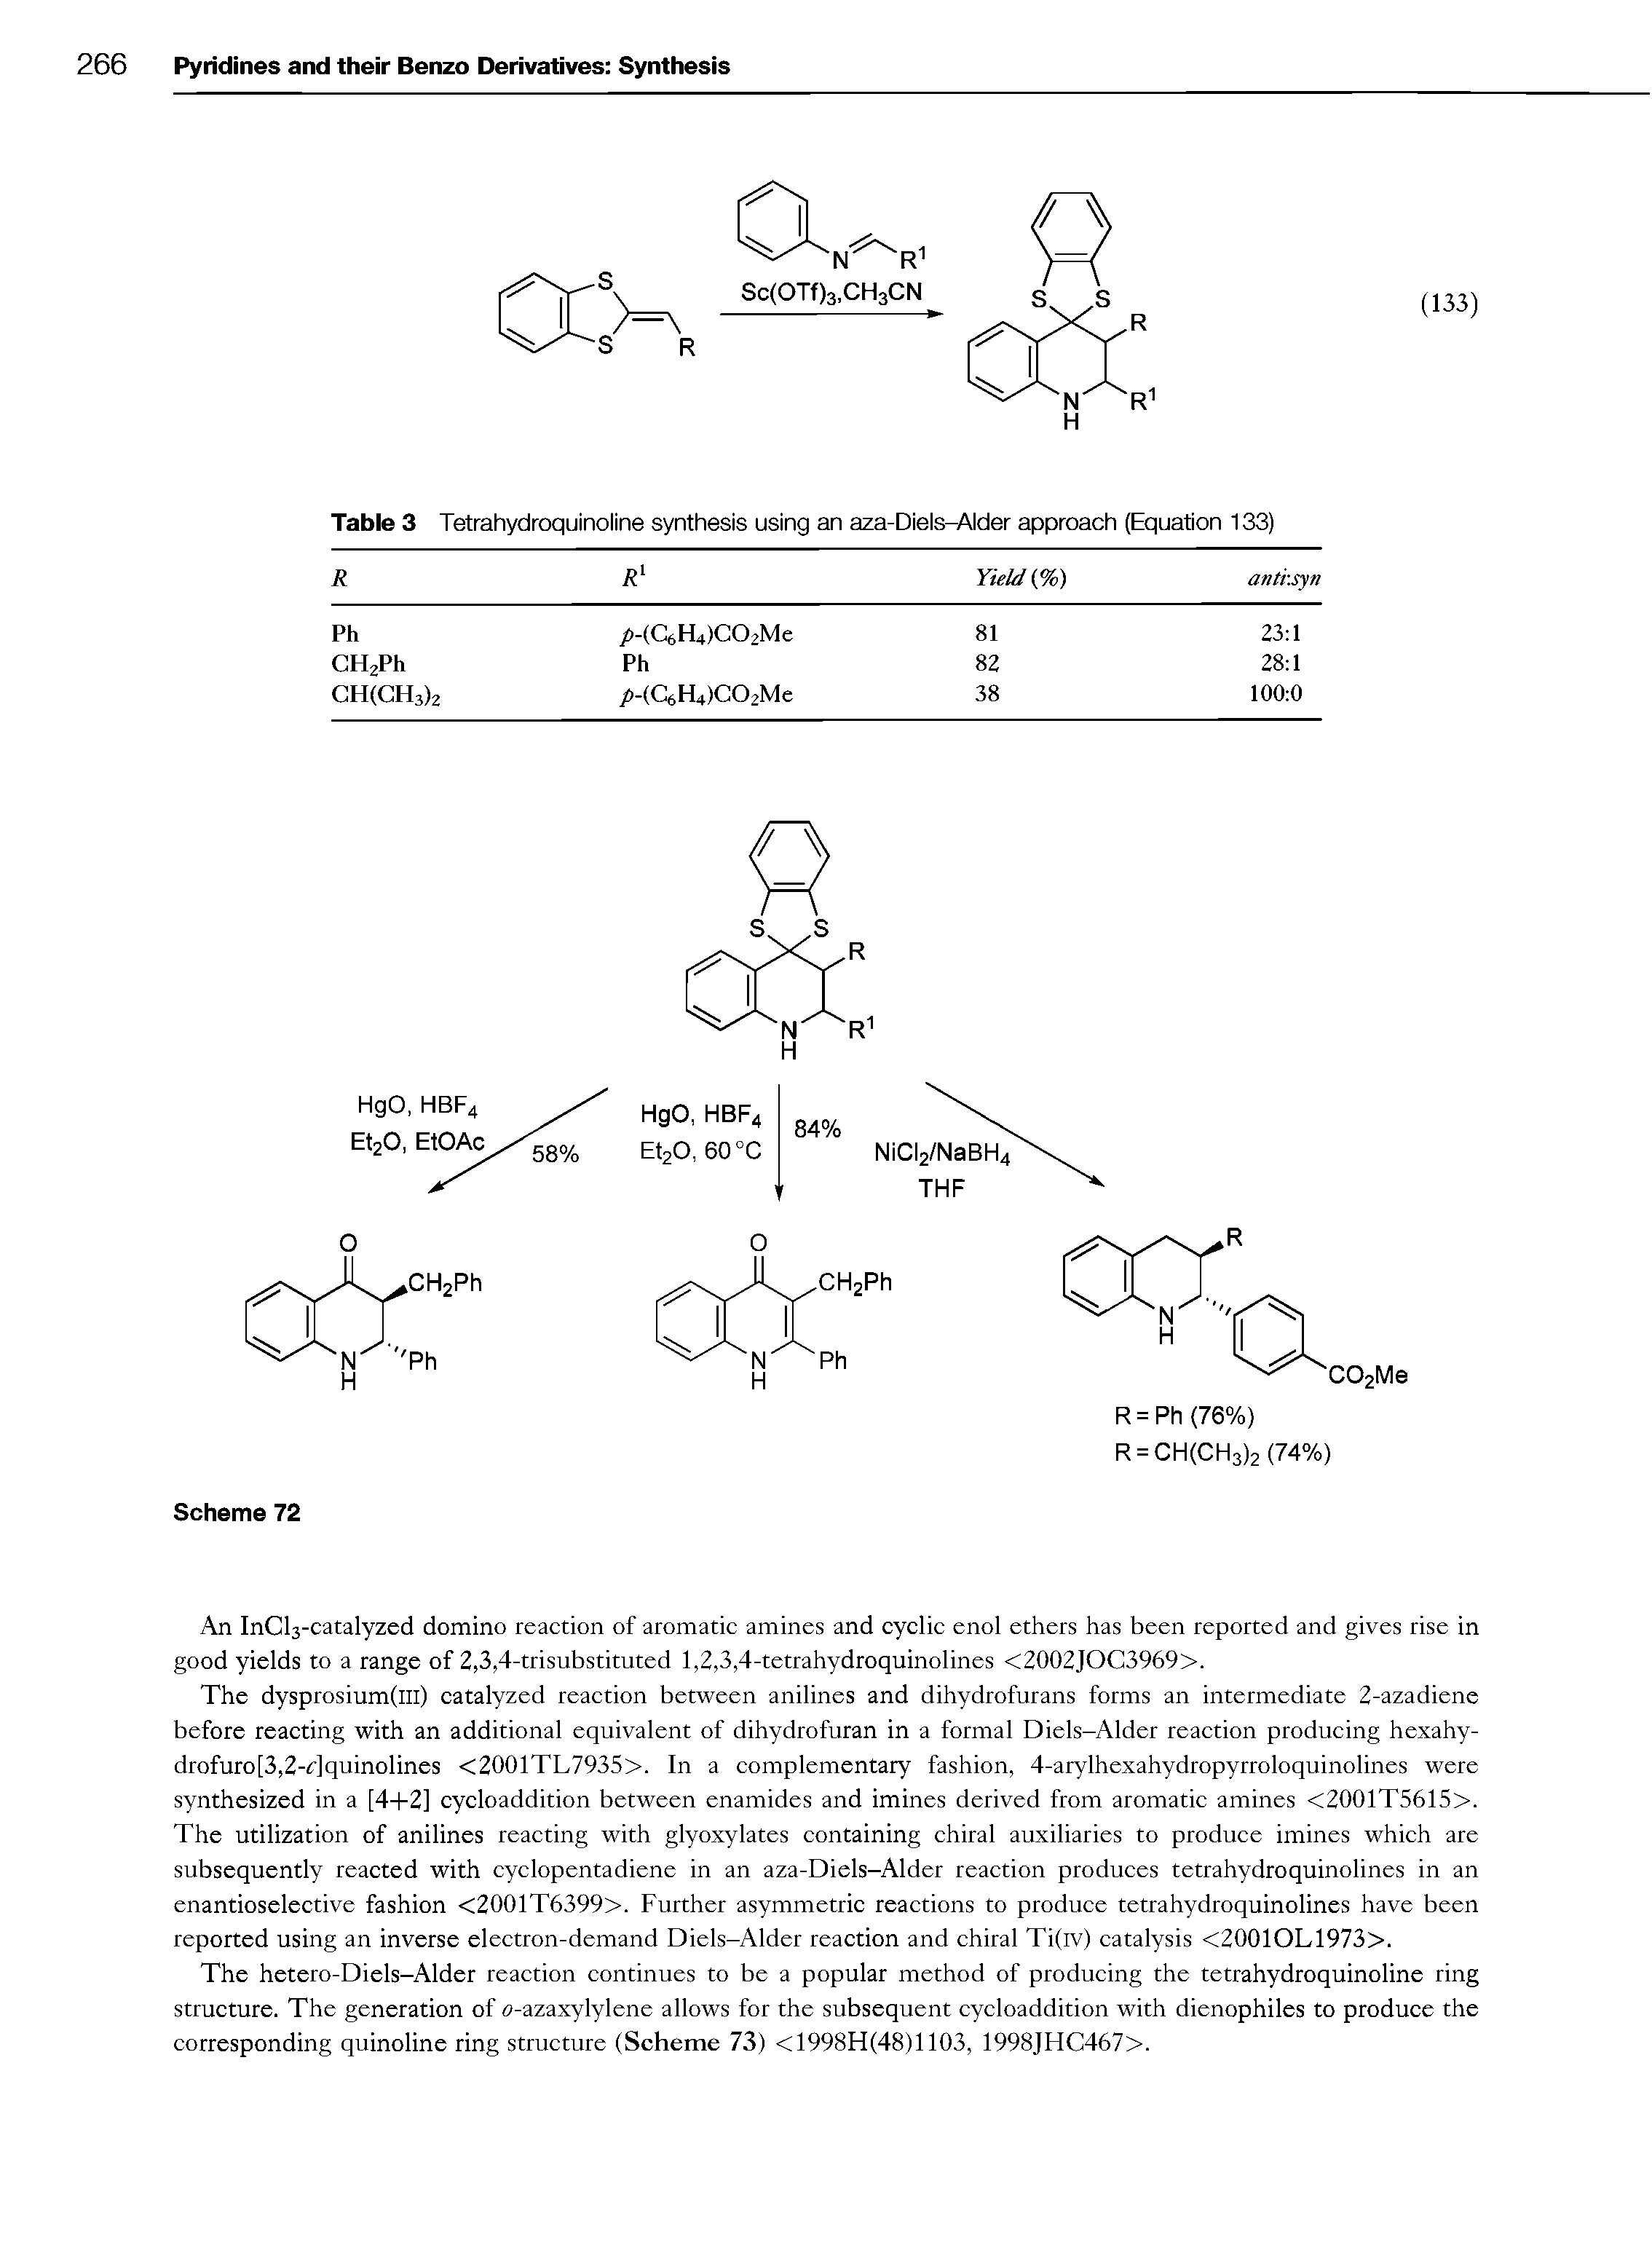 Table 3 Tetrahydroquinoline synthesis using an aza-Diels-Alder approach (Equation 133)...